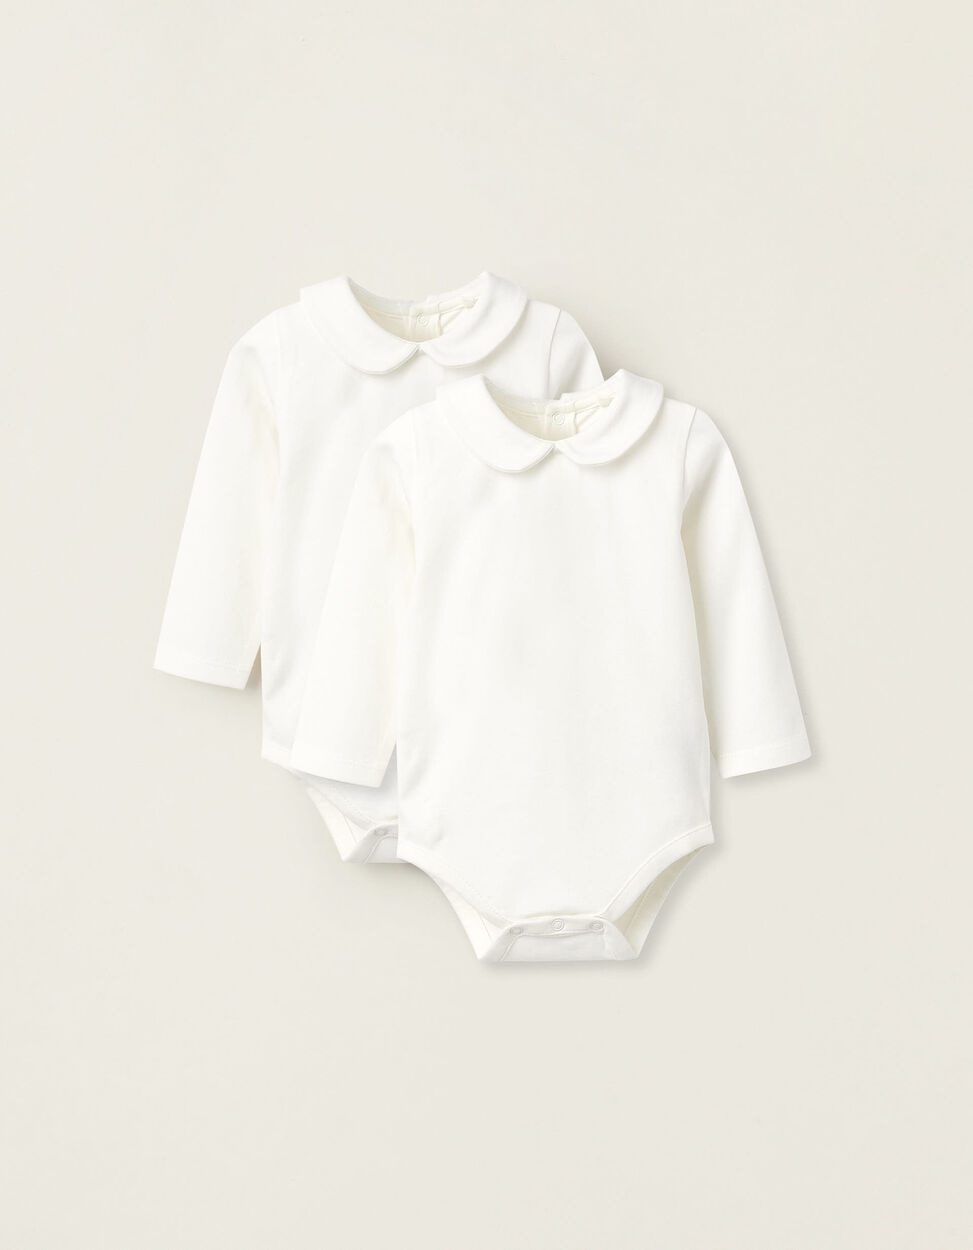 Buy Online Pack of 2 Bodysuits with Peter Pan Collar for Newborn Girls, white